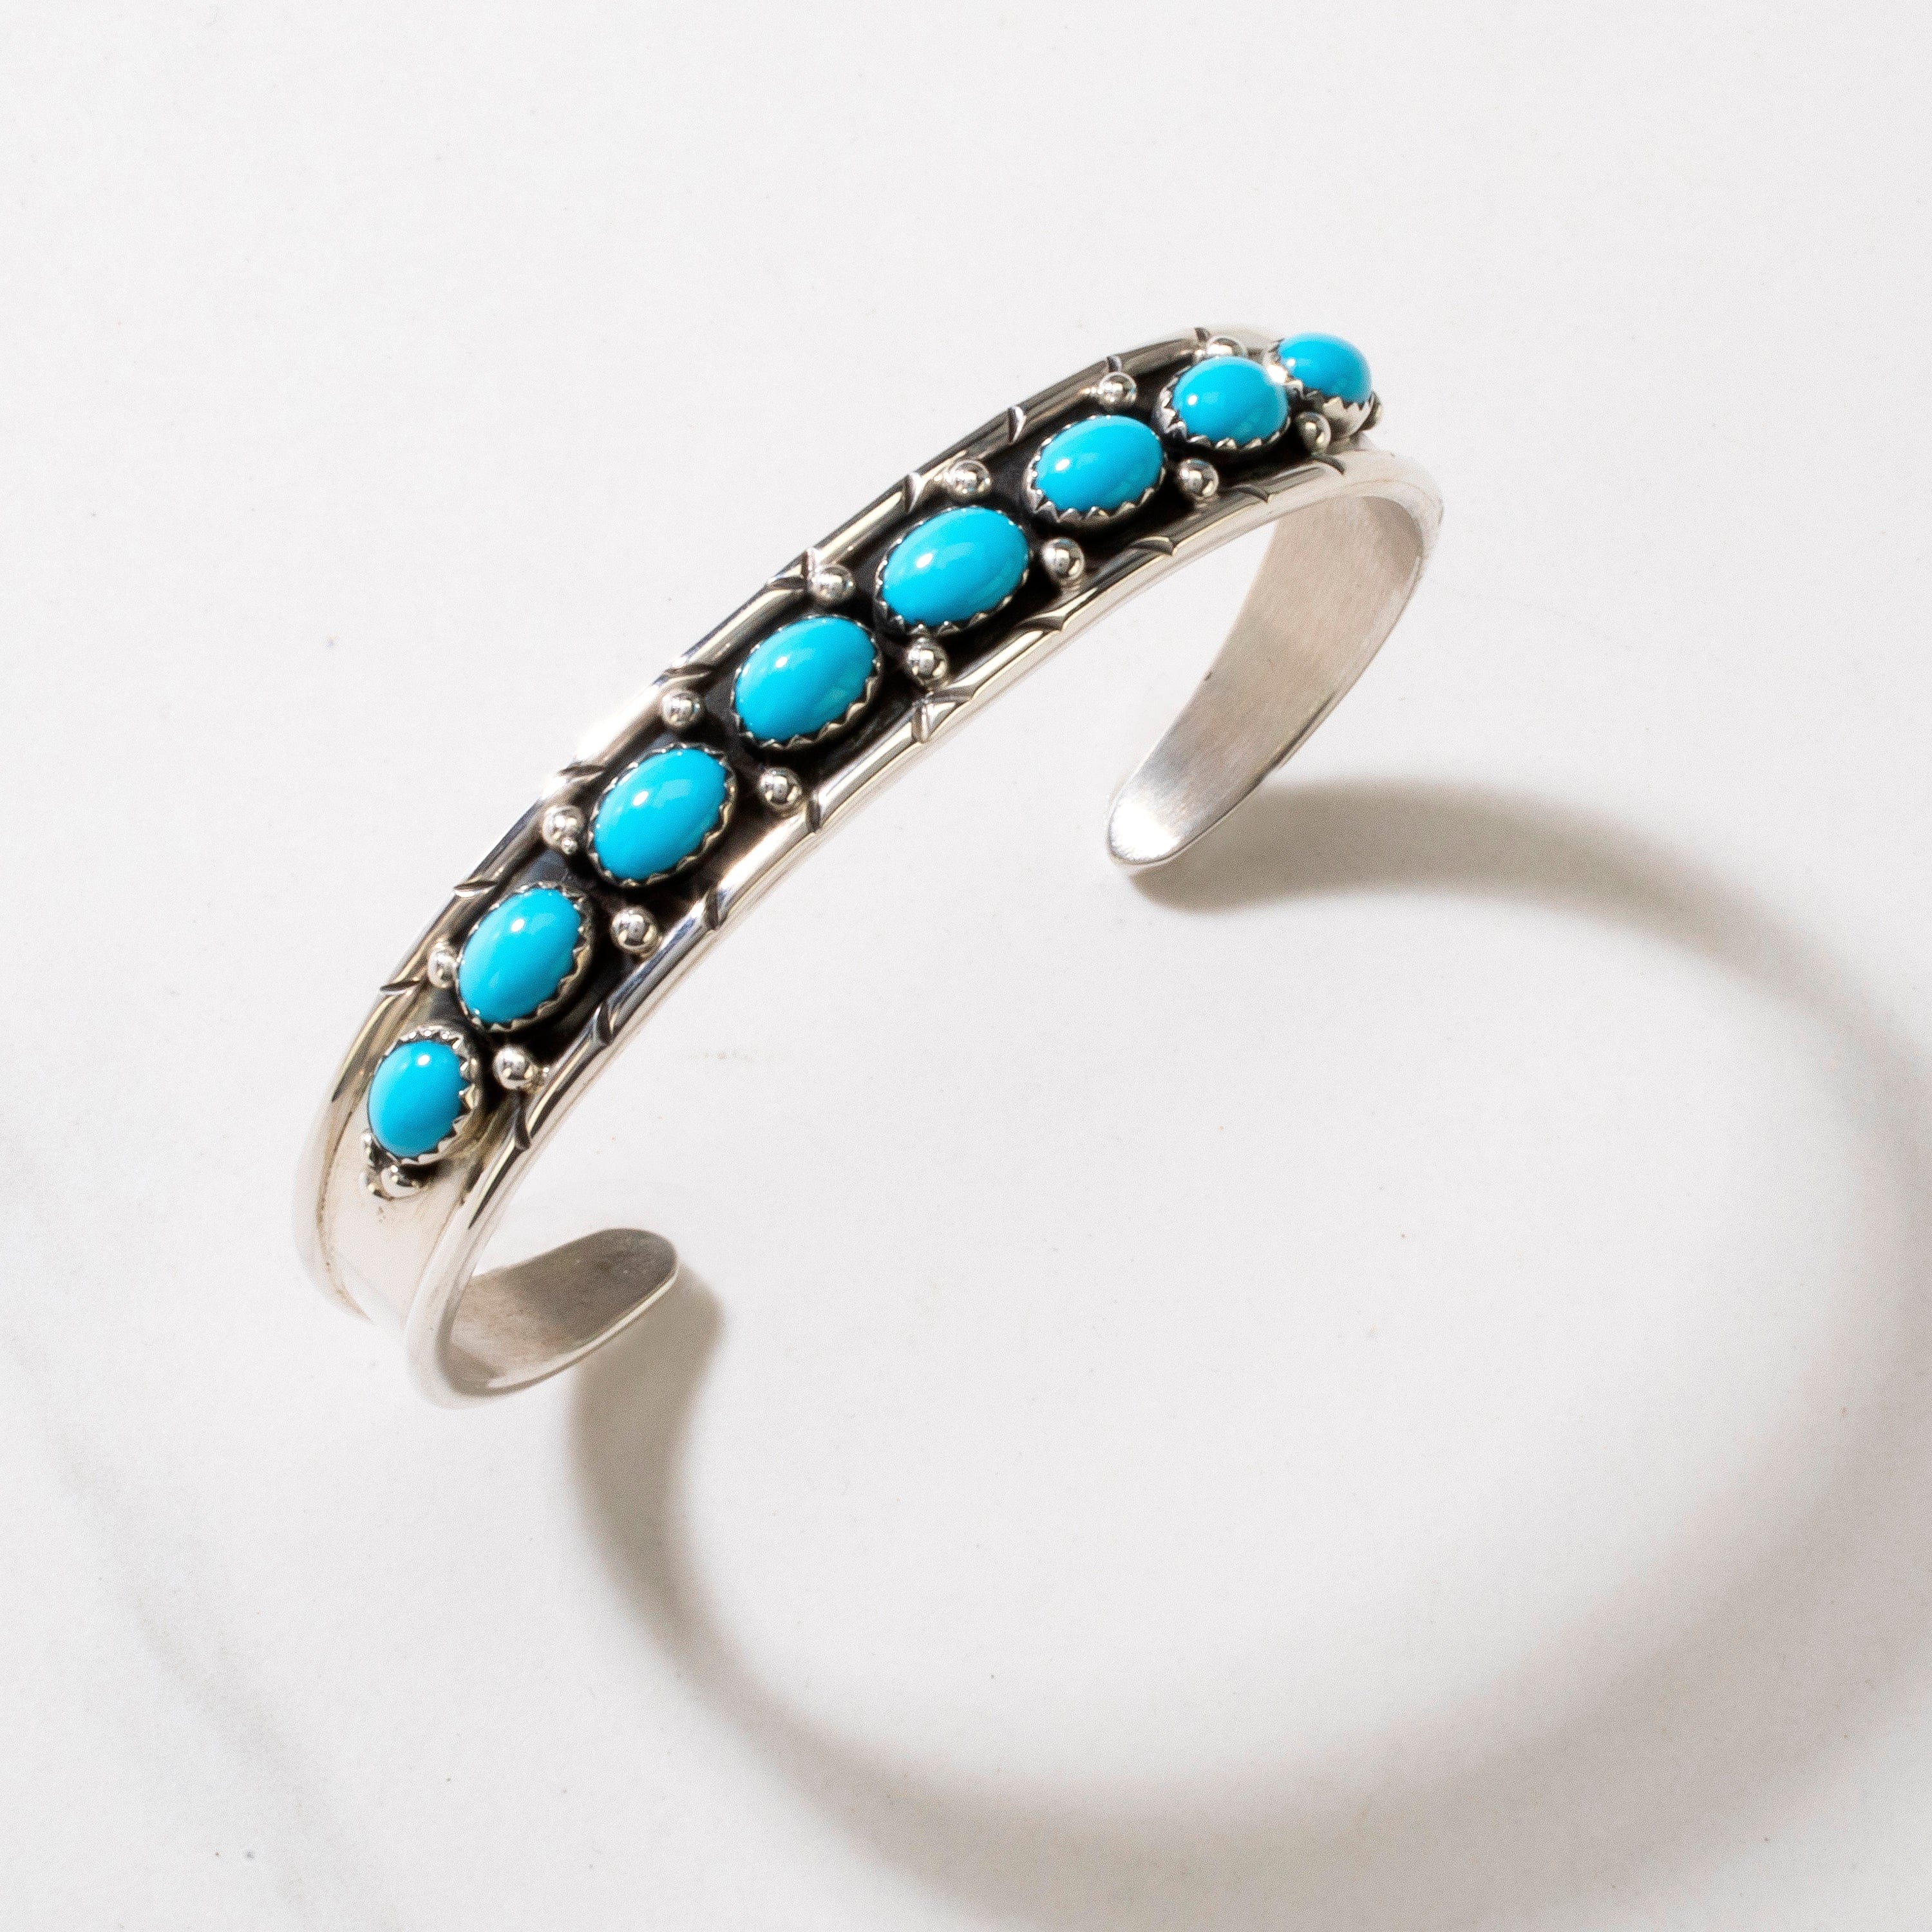 Kalifano Native American Jewelry Russell Sam Navajo Sleeping Beauty Turquoise USA Native American Made 925 Sterling Silver Cuff NAB1200.026